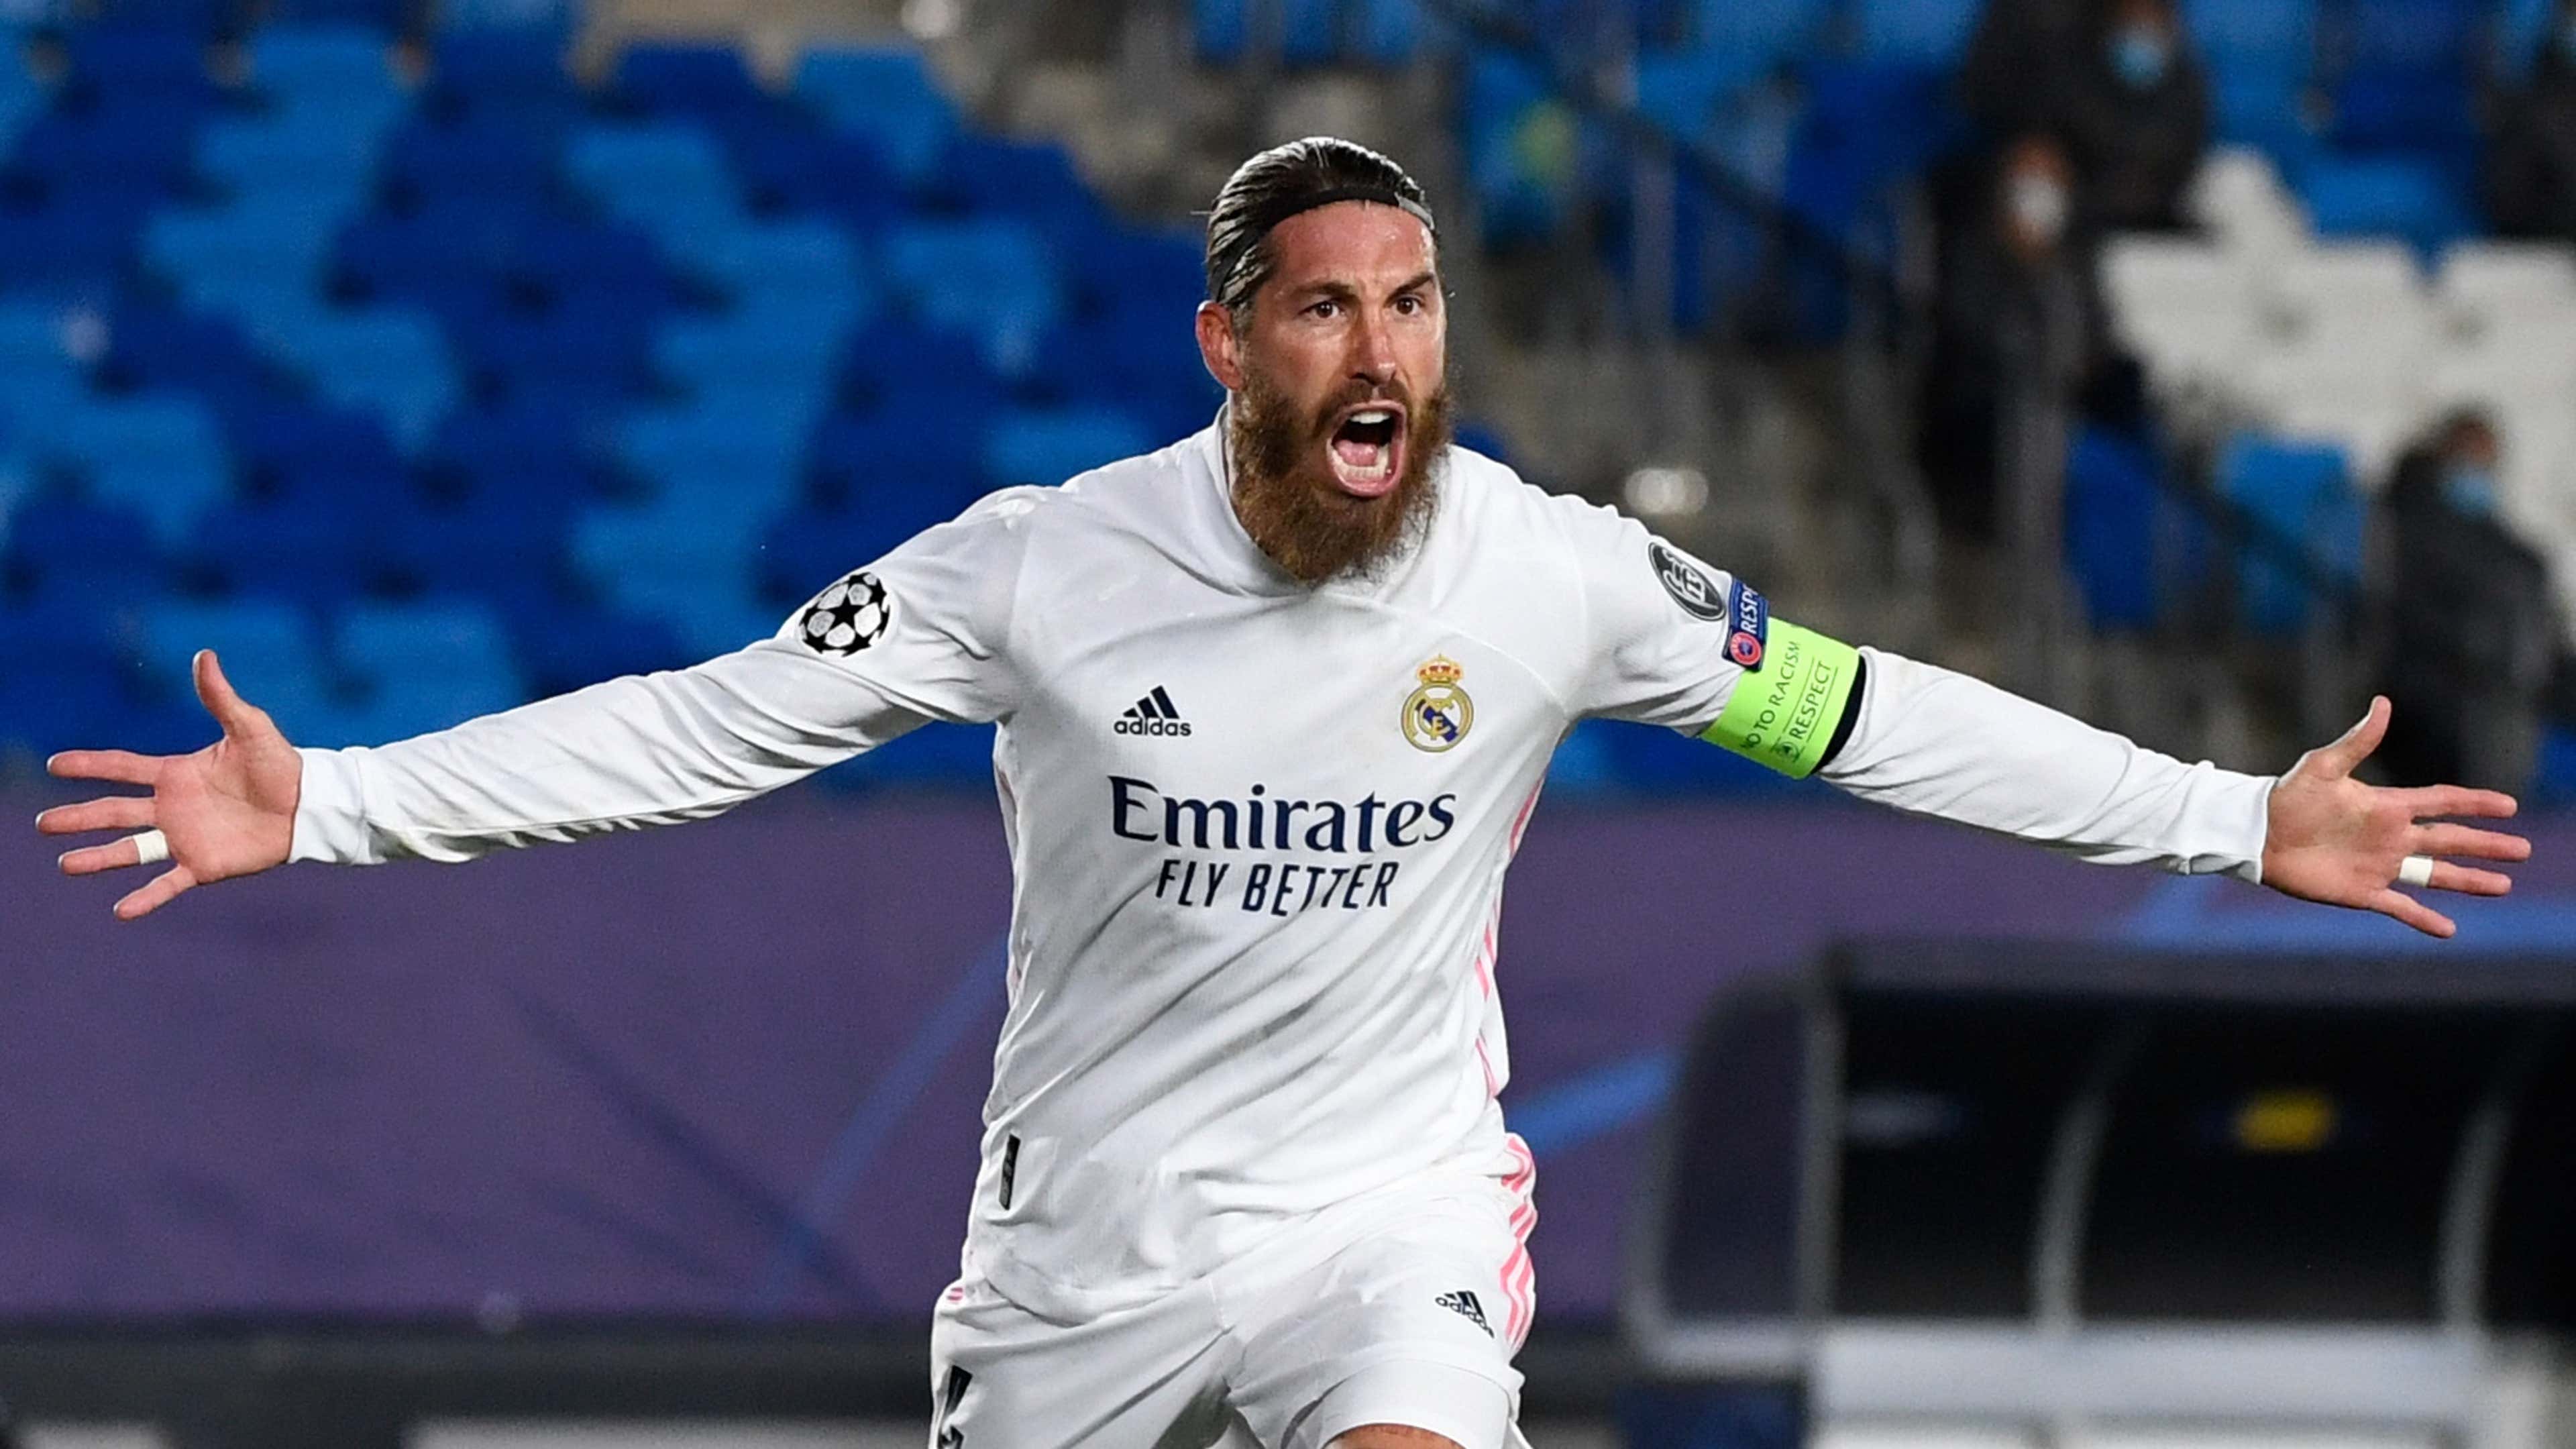 Real Madrid would miss Ramos badly' - Altintop calls for captain